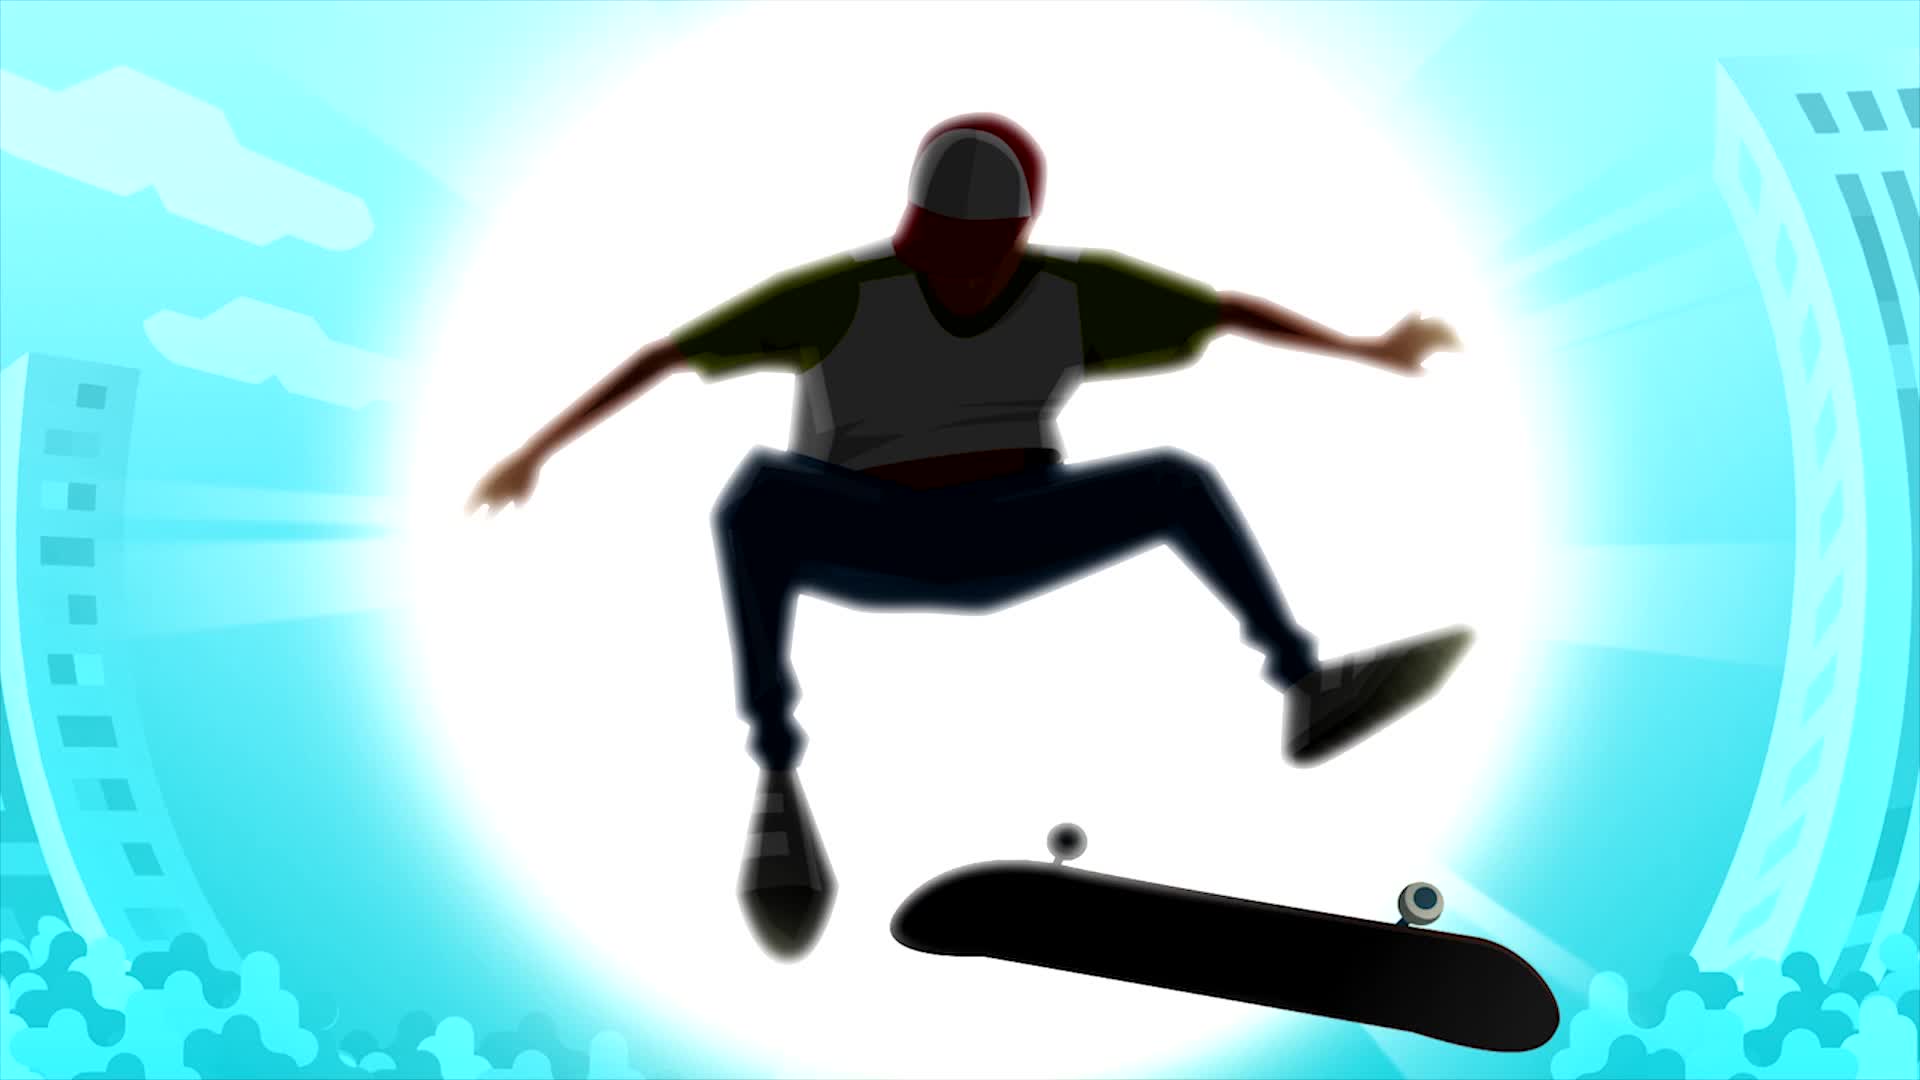 OlliOlli2: The Making of the XL Edition